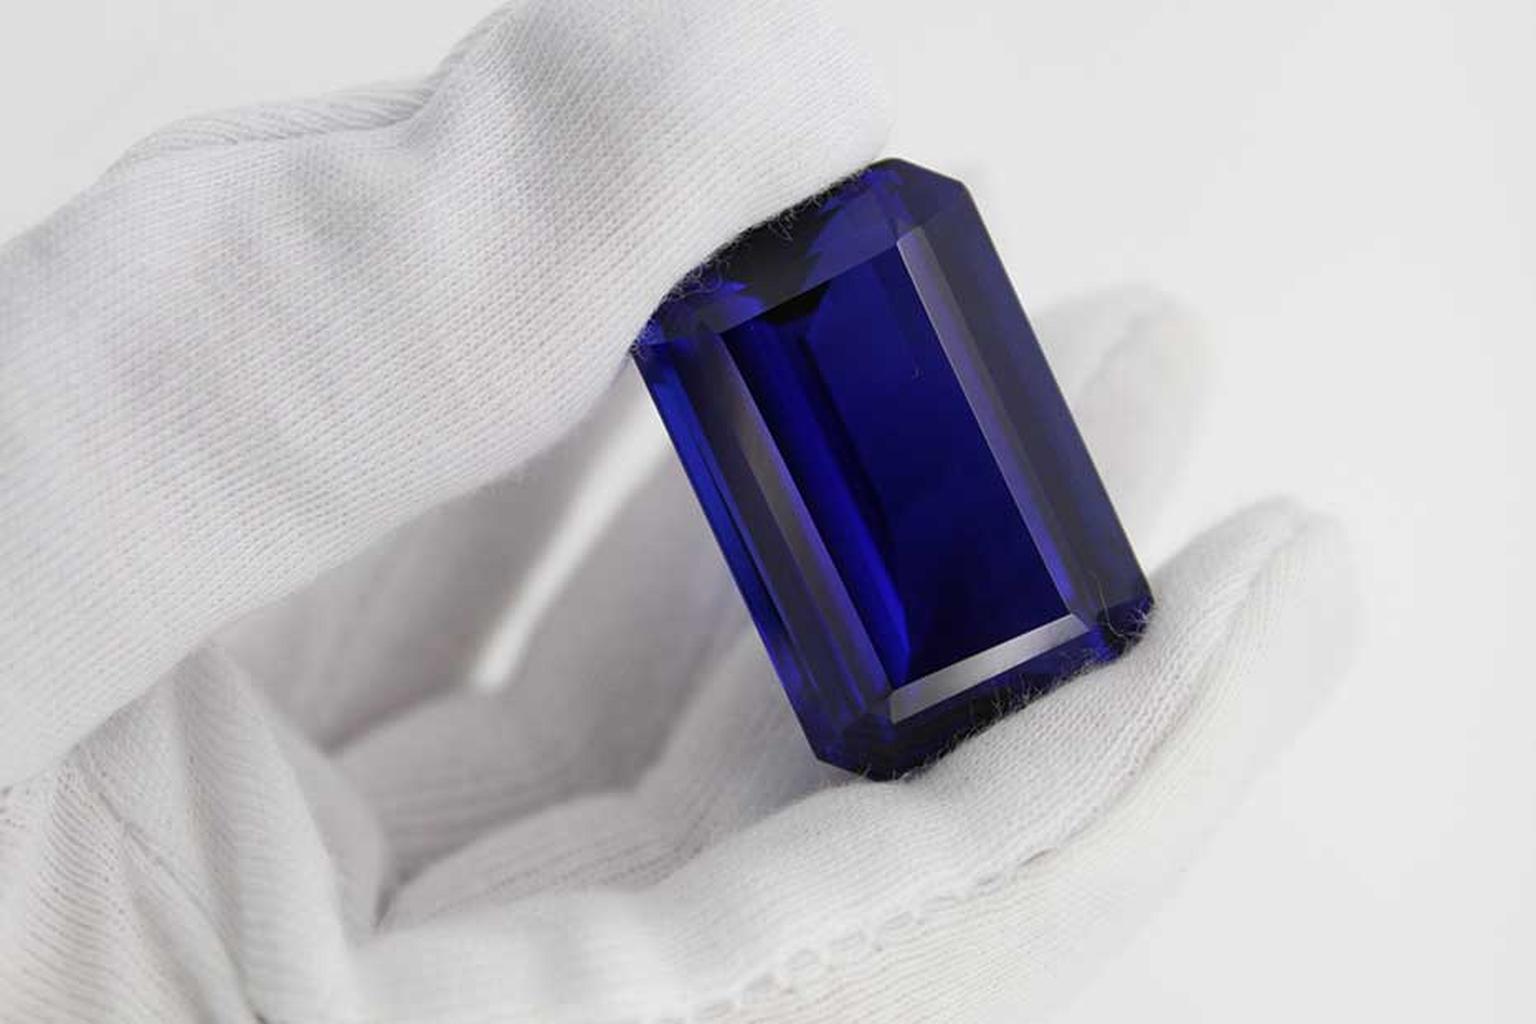 A 109ct blueish-violet tanzanite discovered by TanzaniteOne, which mines tanzanite exclusively in Tanzania, the only country in which tanzanite has been discovered.